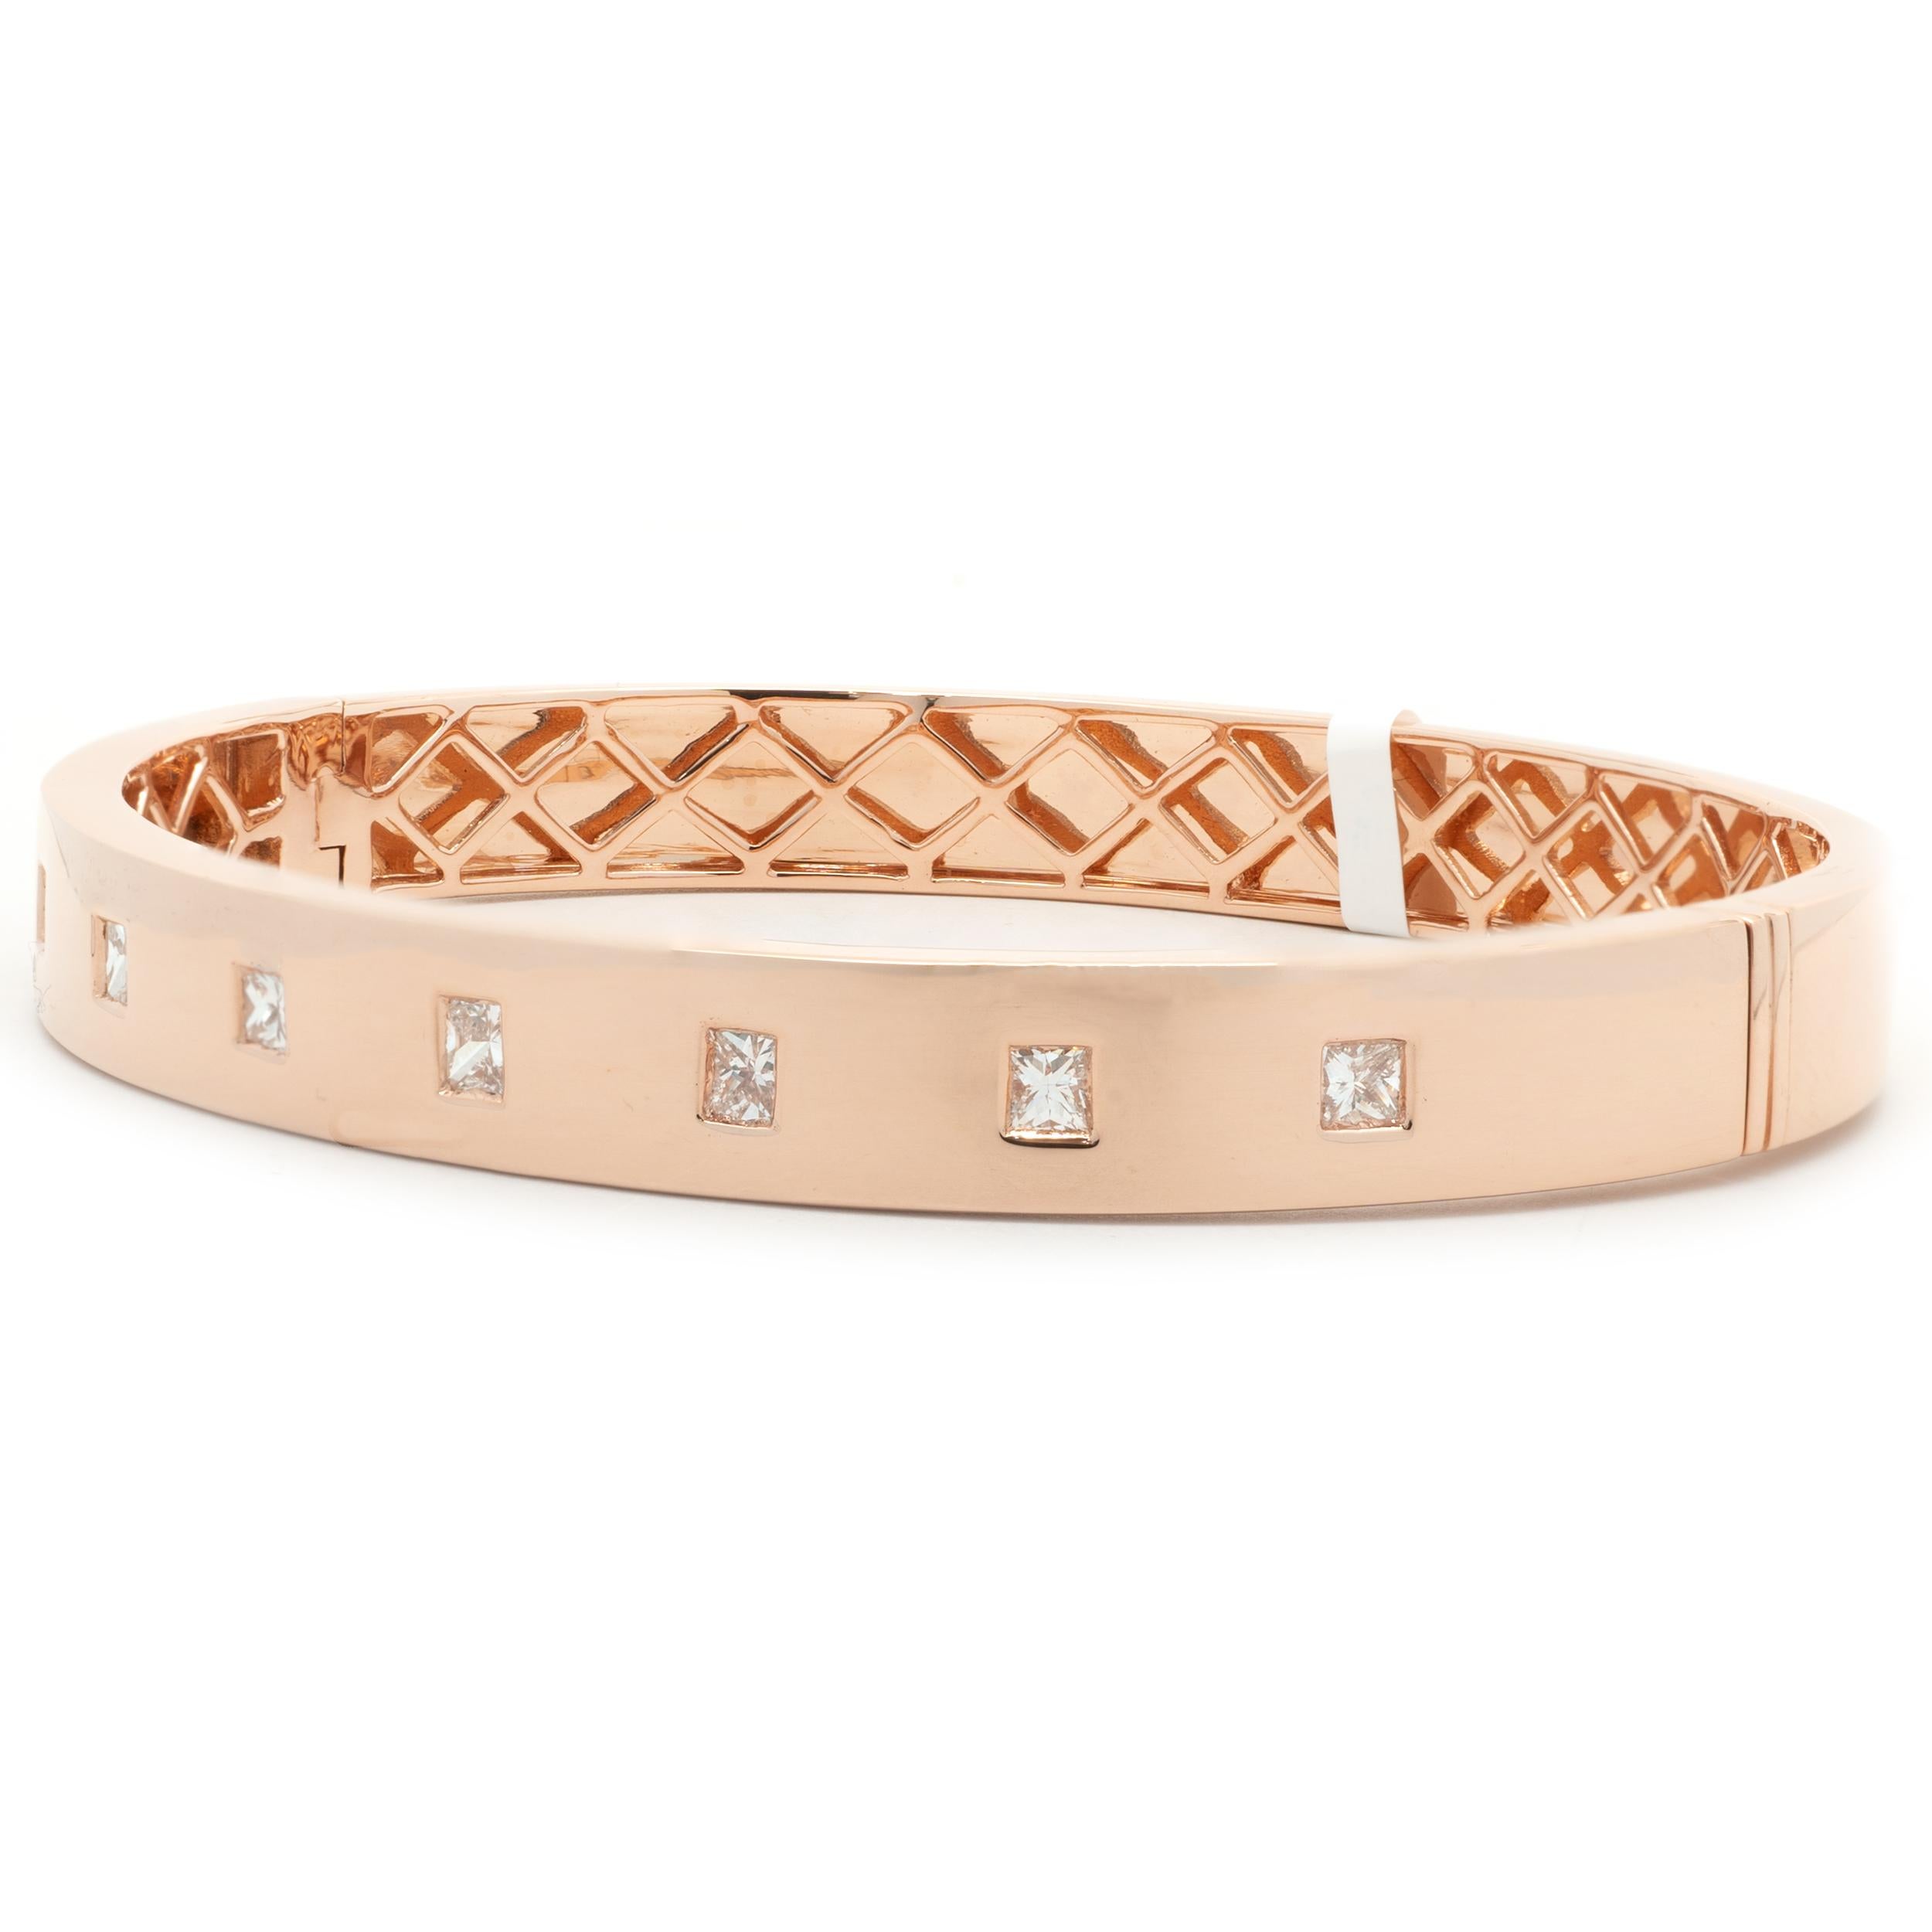 Designer: custom
Material: 18K rose gold
Diamonds: 8 princess cut = 1.30cttw
Color: G
Clarity: VS2
Dimensions: bracelet will fit up to a 7-inch wrist
Weight: 21.28 grams
